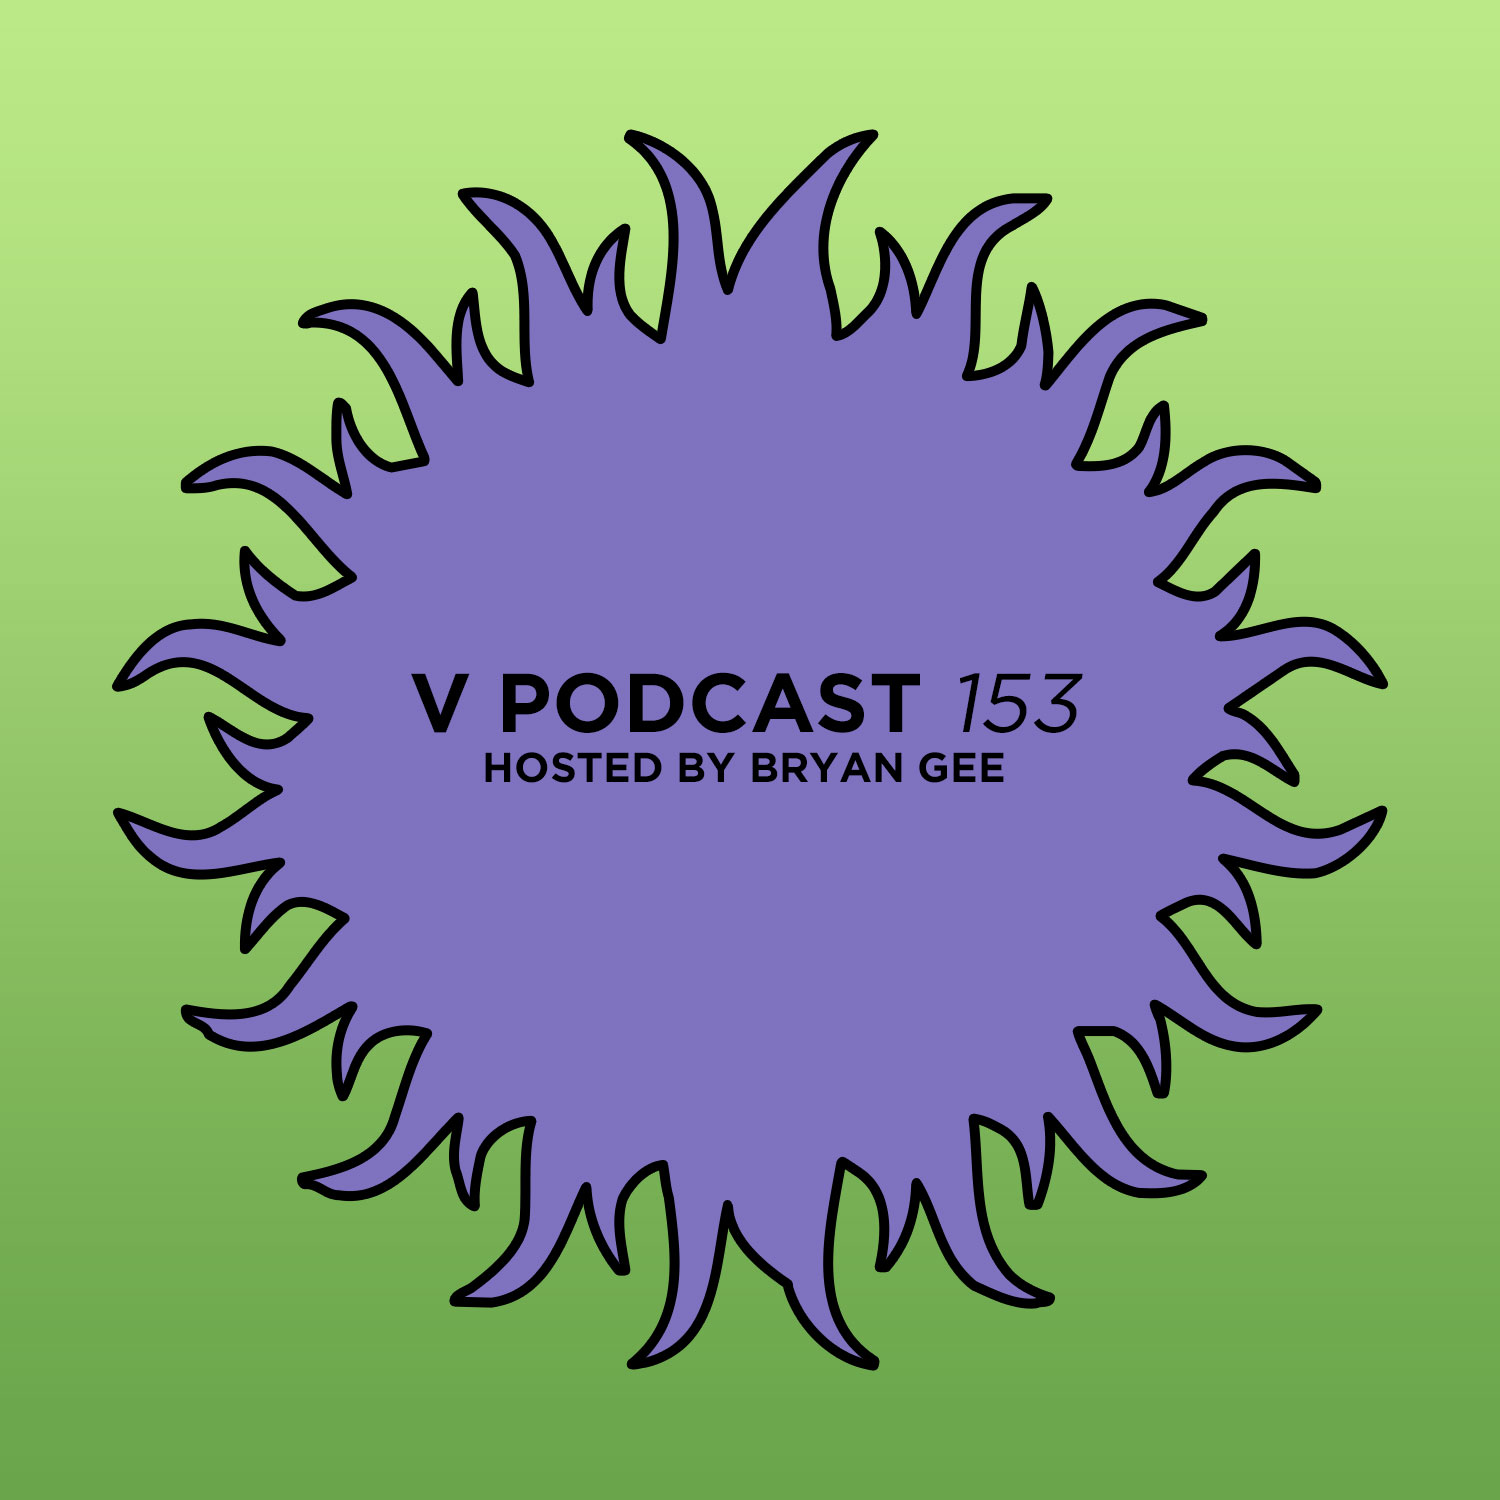 V Podcast 153 - Hosted by Bryan Gee Artwork